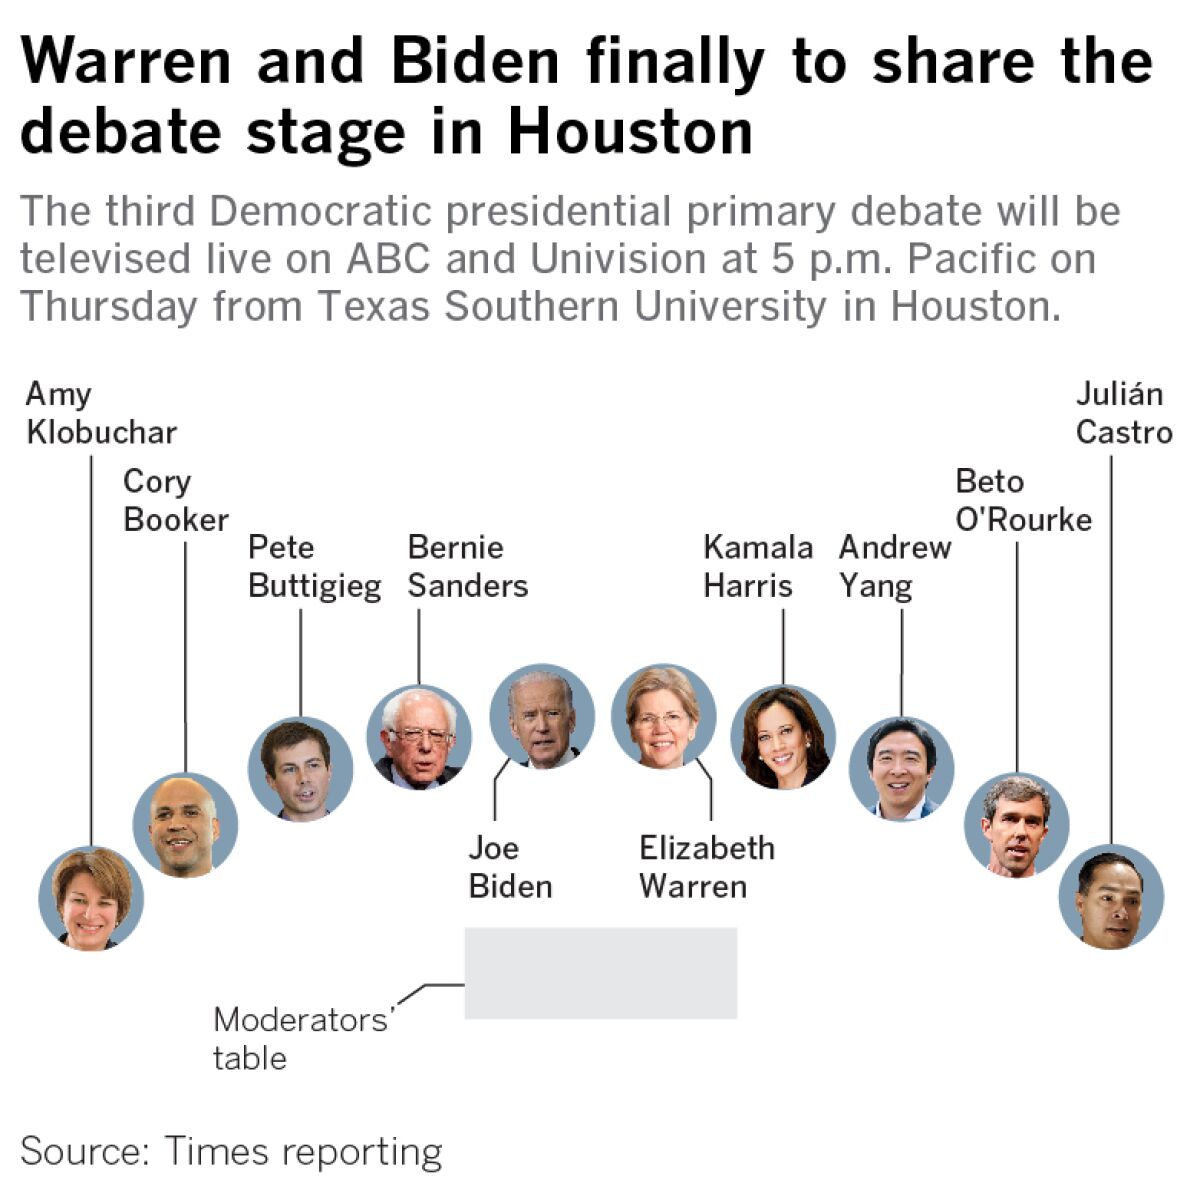 Warren and Biden finally to share the debate spotlight in Houston during the third Democratic Party primary debate. It will be televised live on ABC and Univision at 5 p.m. Pacific on Sept. 12 from Texas Southern University in Houston.